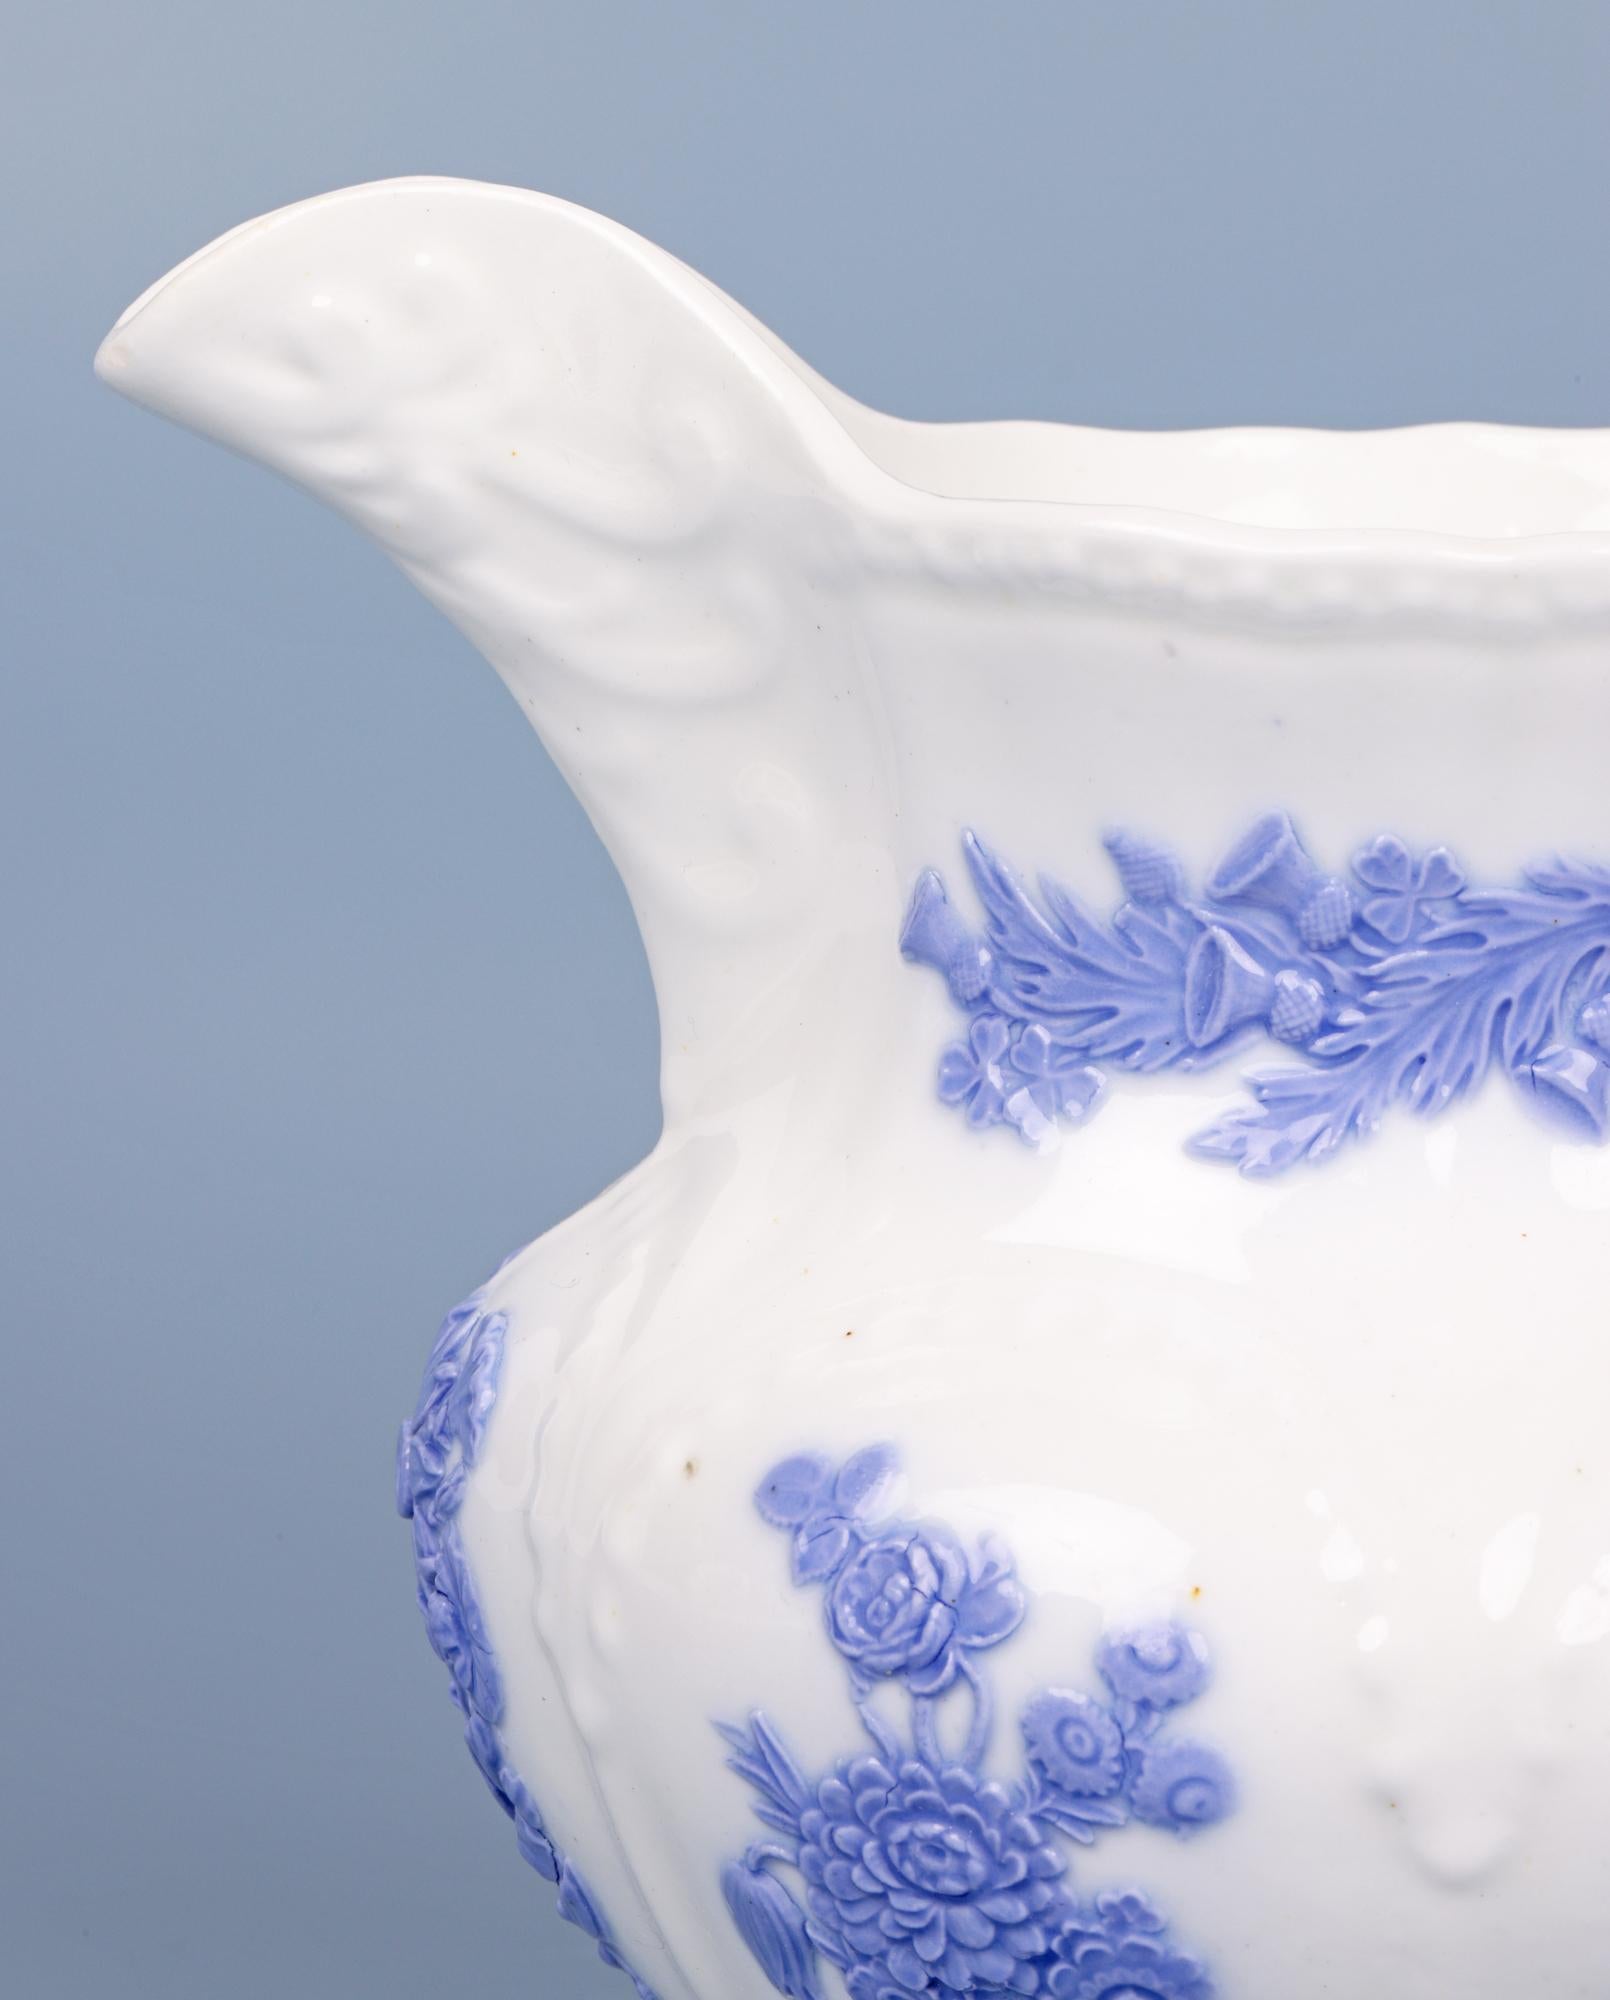 A very fine antique English Staffordshire porcelain jug decorated with lilac sprigged floral designs and dating from around 1830. The jug is finely made in white porcelain and is of rounded shape standing on a narrow round pedestal shaped foot and